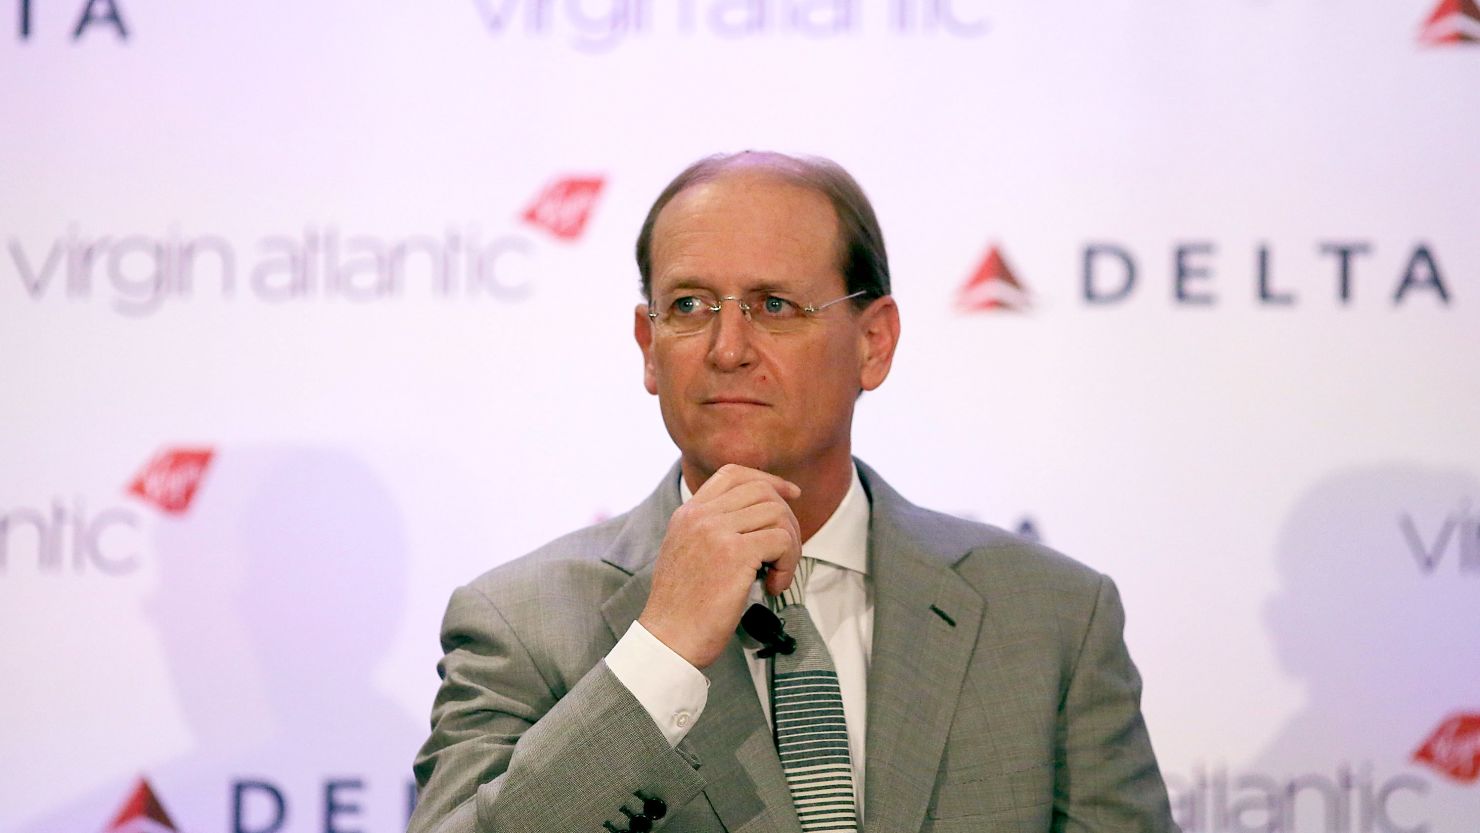 Delta Airlines CEO Richard Anderson, seen here in December 2012,  gets kudos for giving up his seat for a passenger.